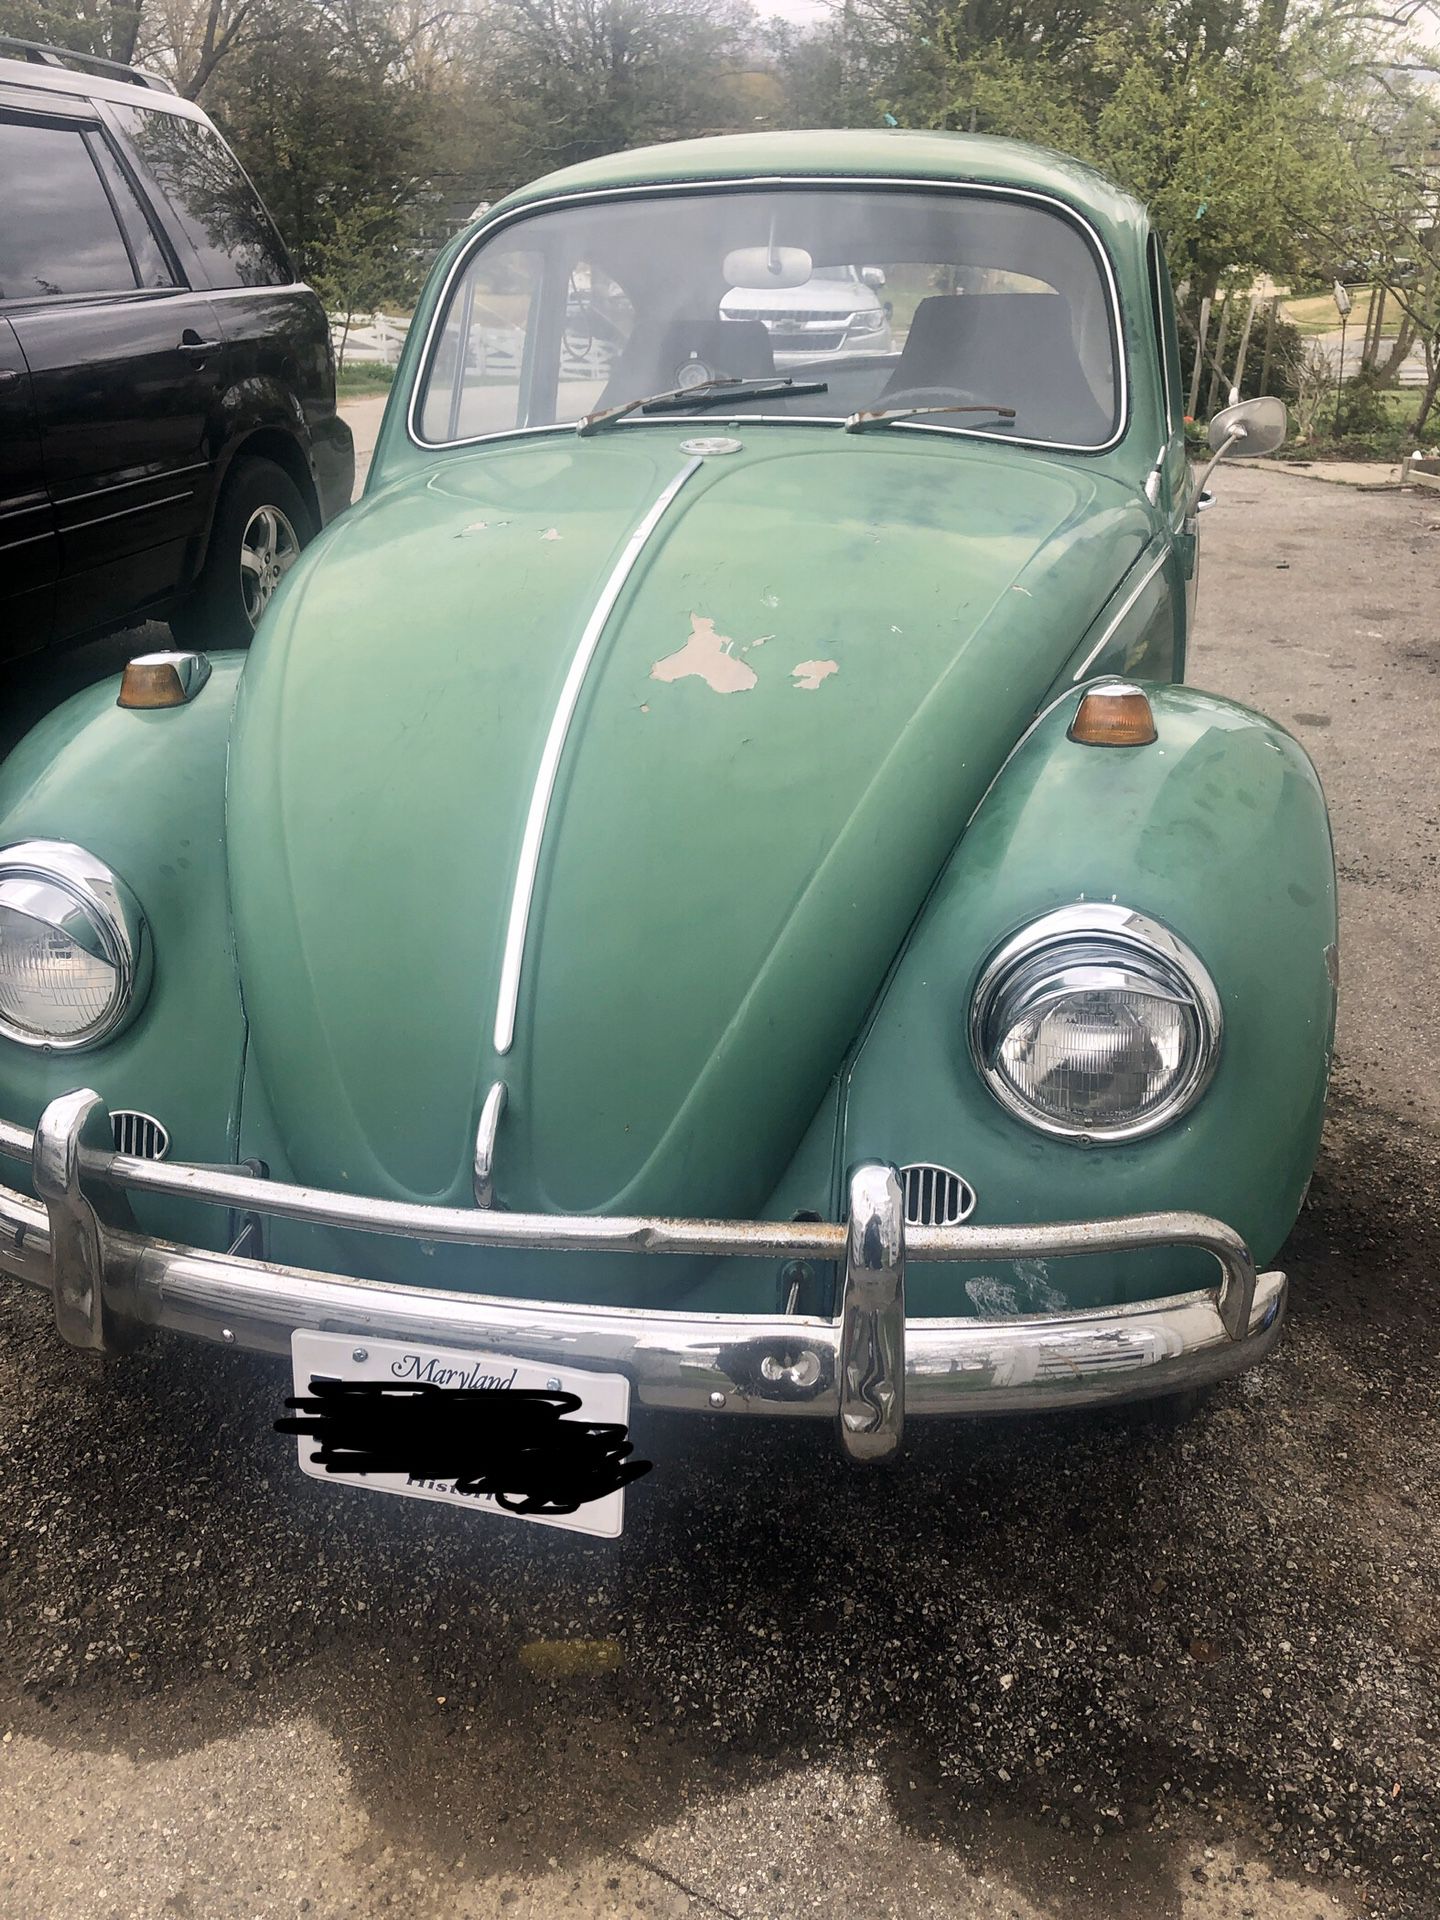 1969 vw beetle. If is in the add is available